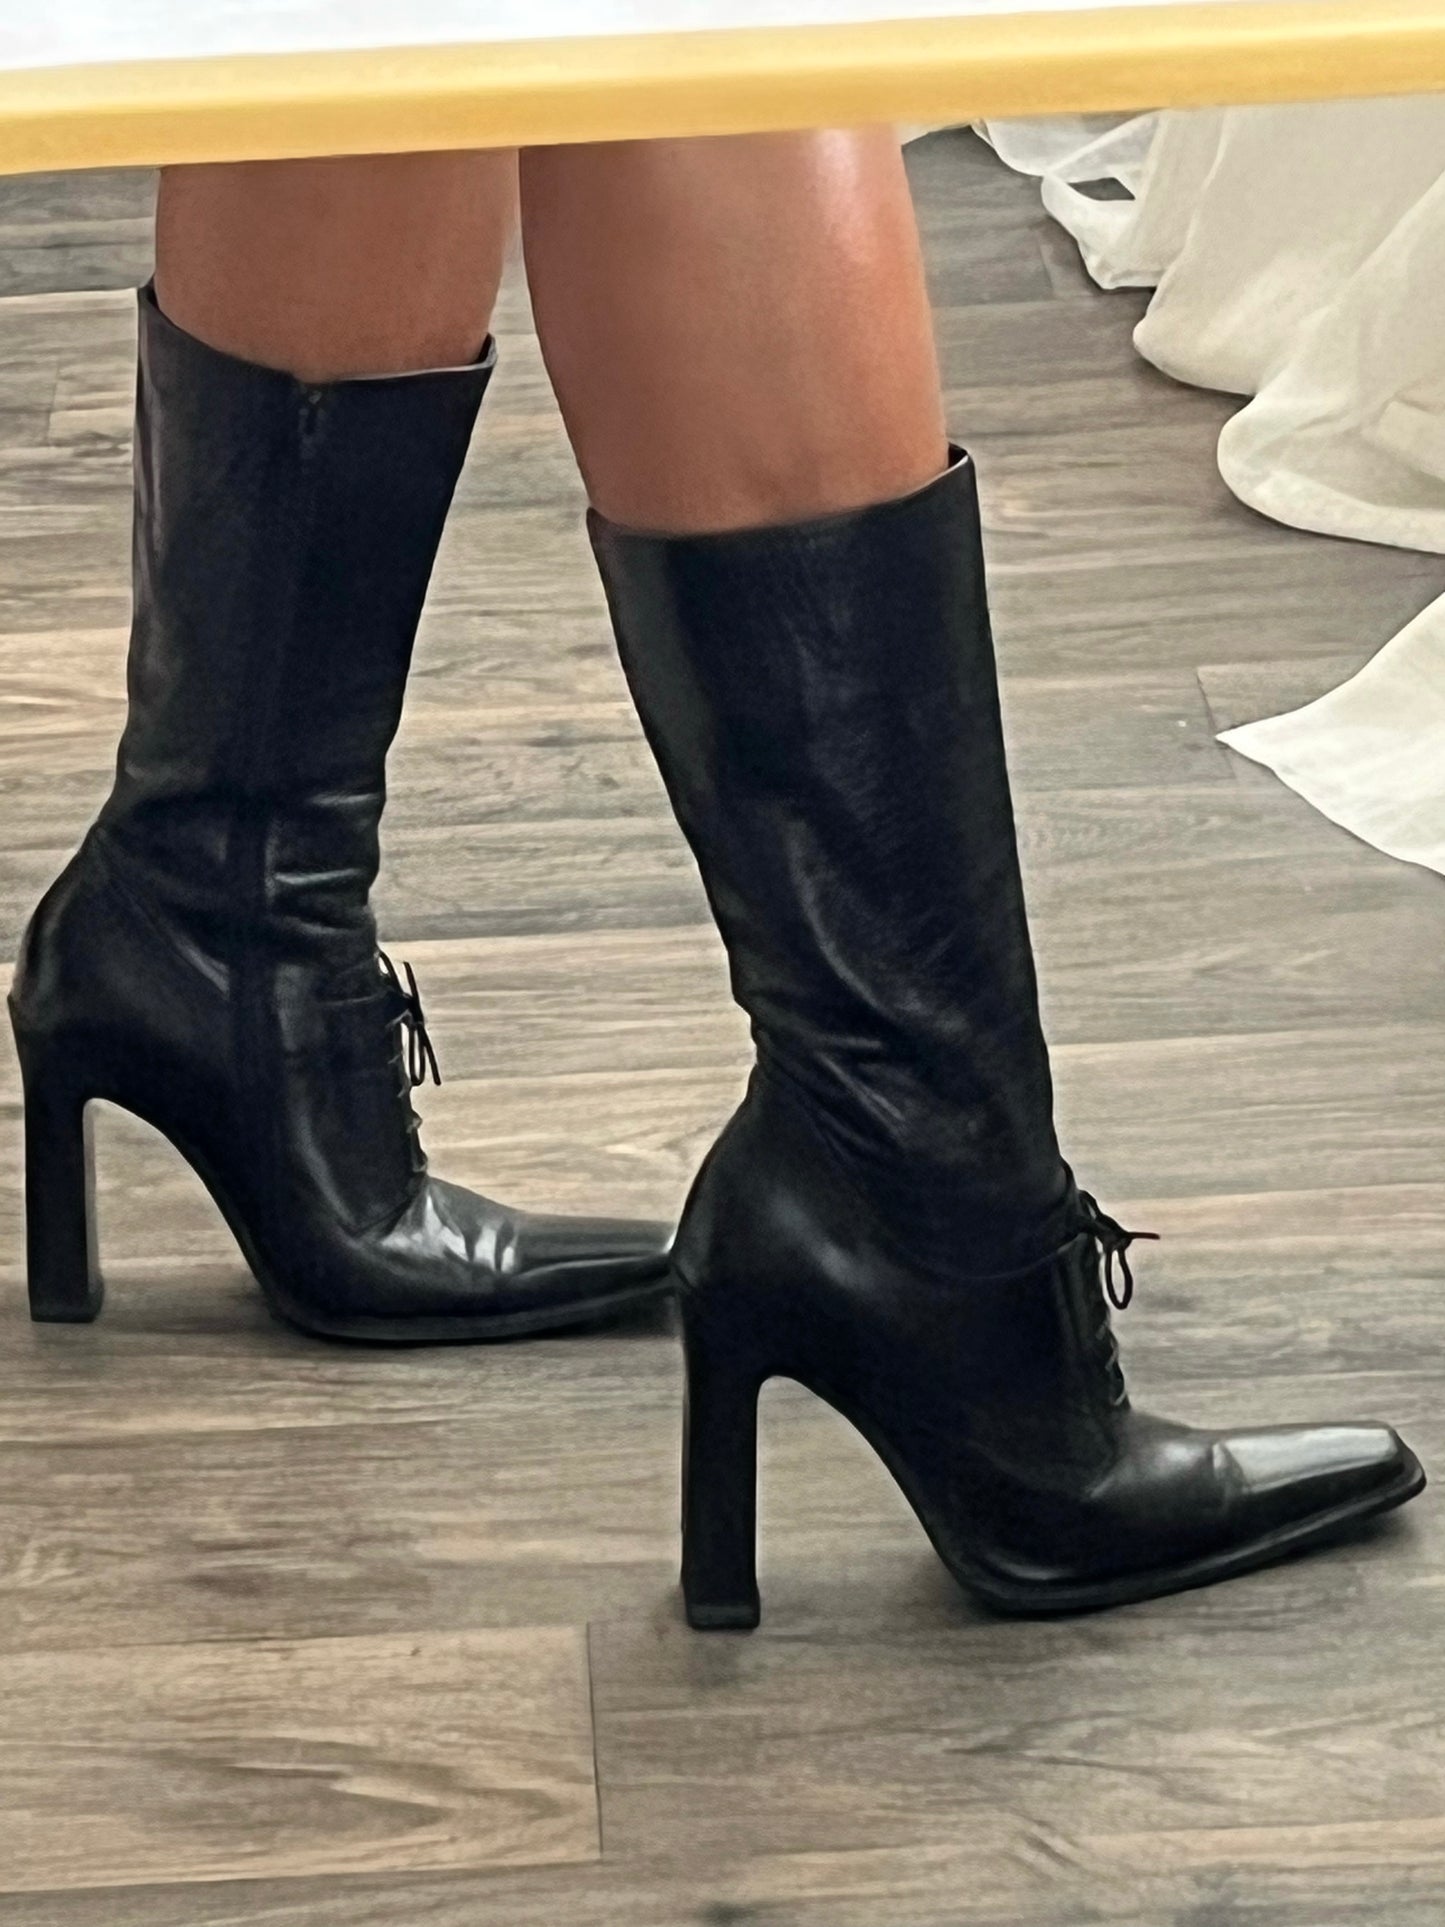 Vintage leather boots